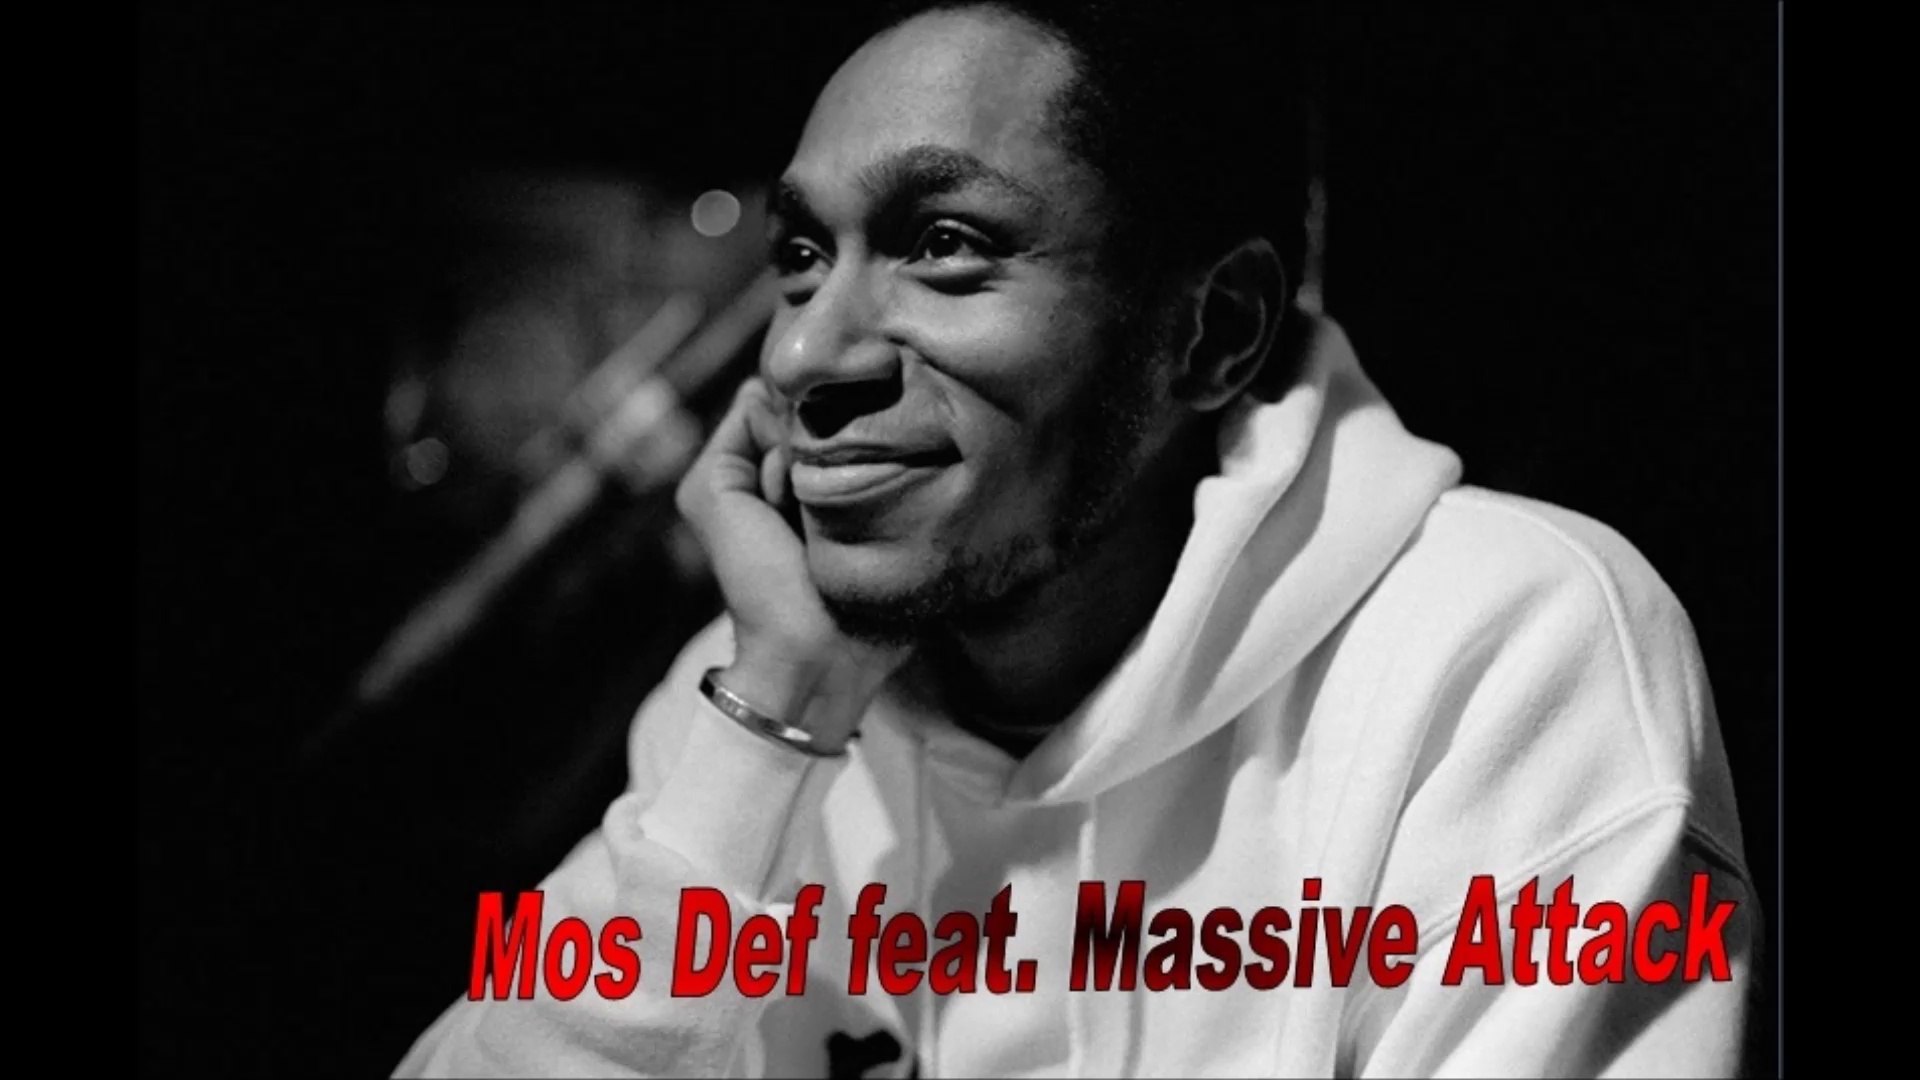 I Against I - Mos Def feat.Massive Attack [Official HQ Audio